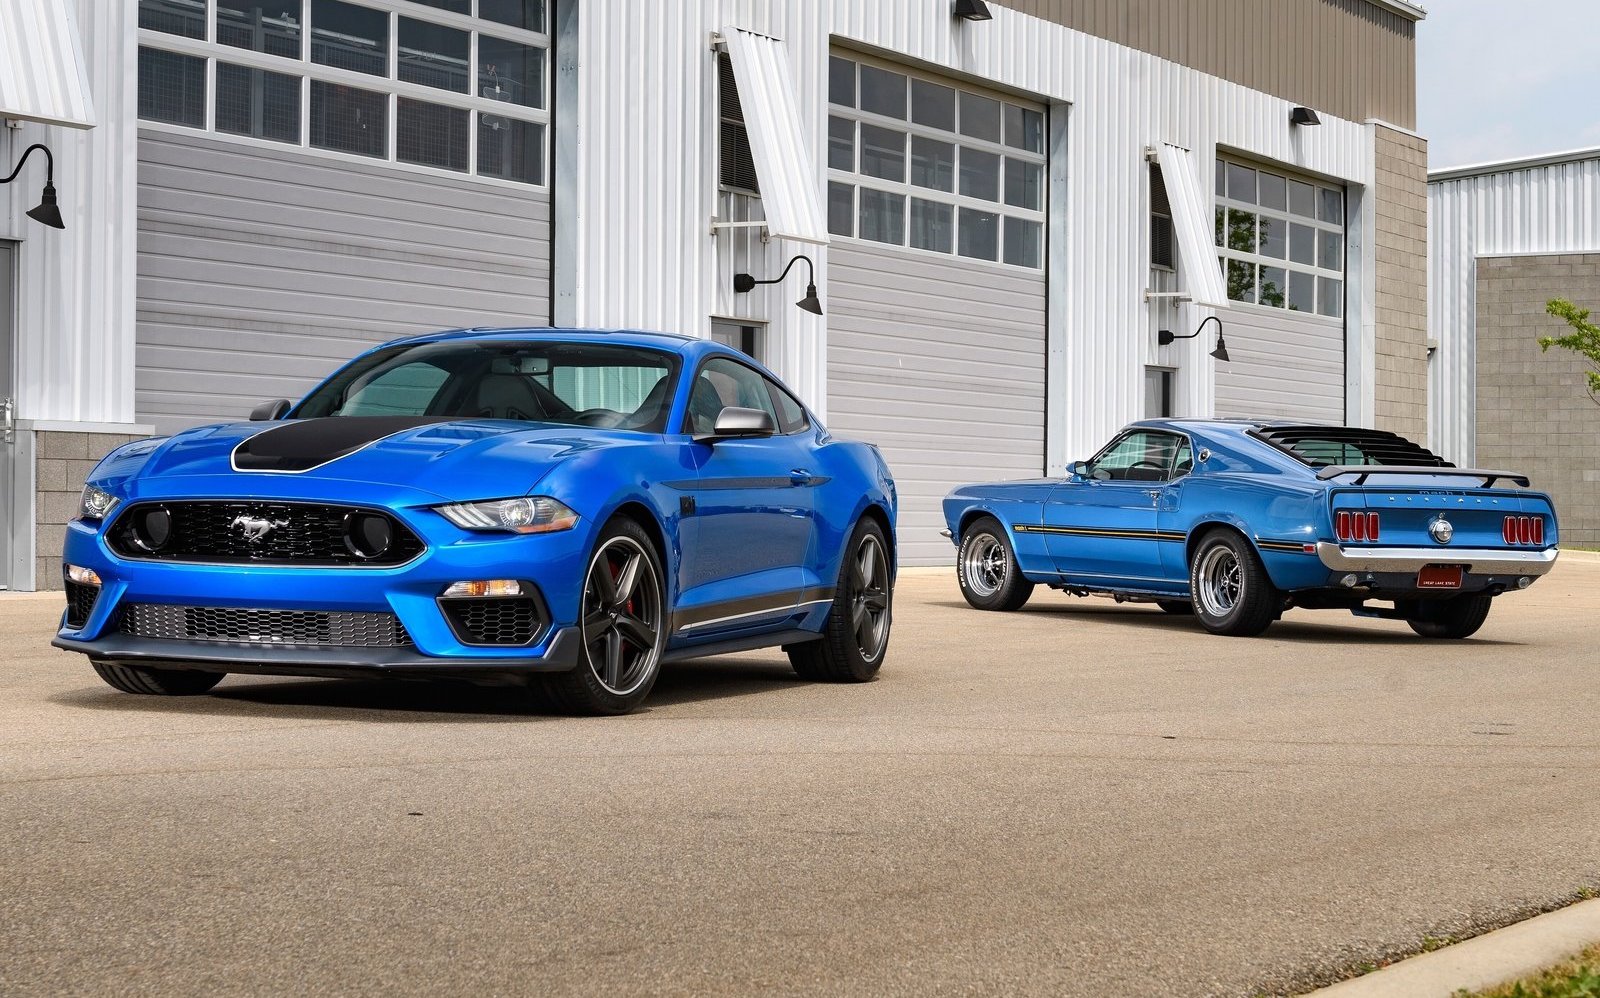 Ford Australia confirms Mustang Mach 1 for 2021